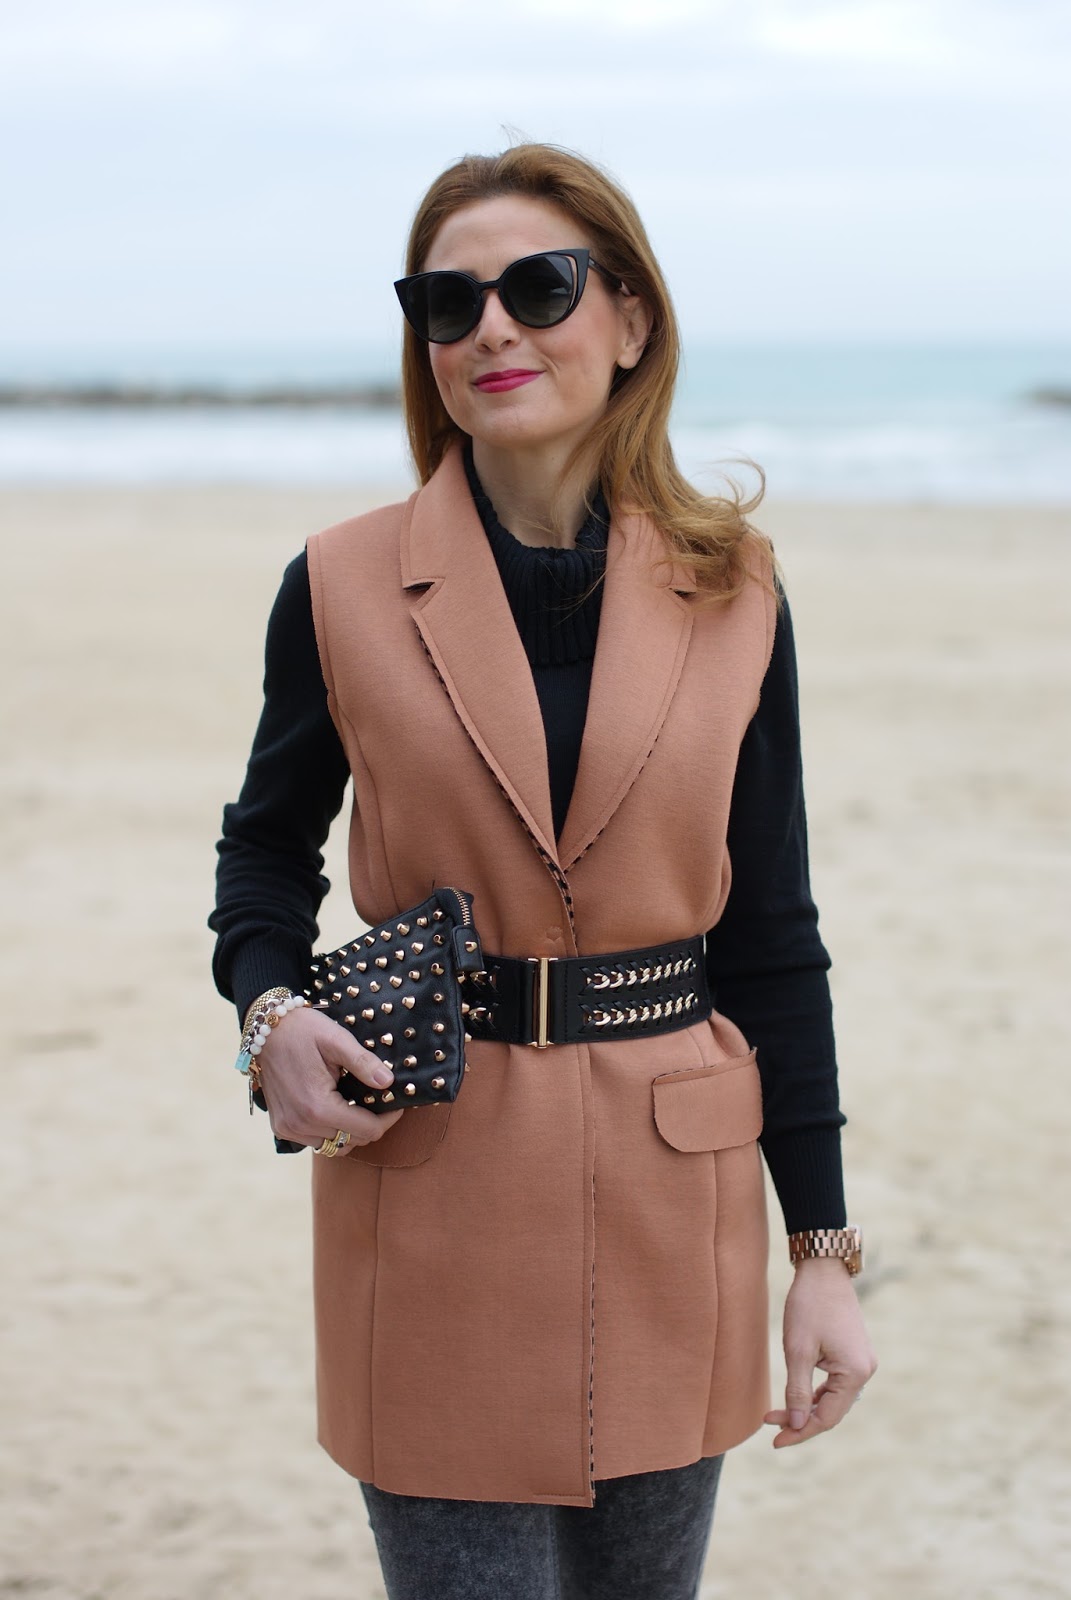 How to spice up a simple outfit with a camel sleeveless jacket on Fashion and Cookies fashion blog, fashion blogger style